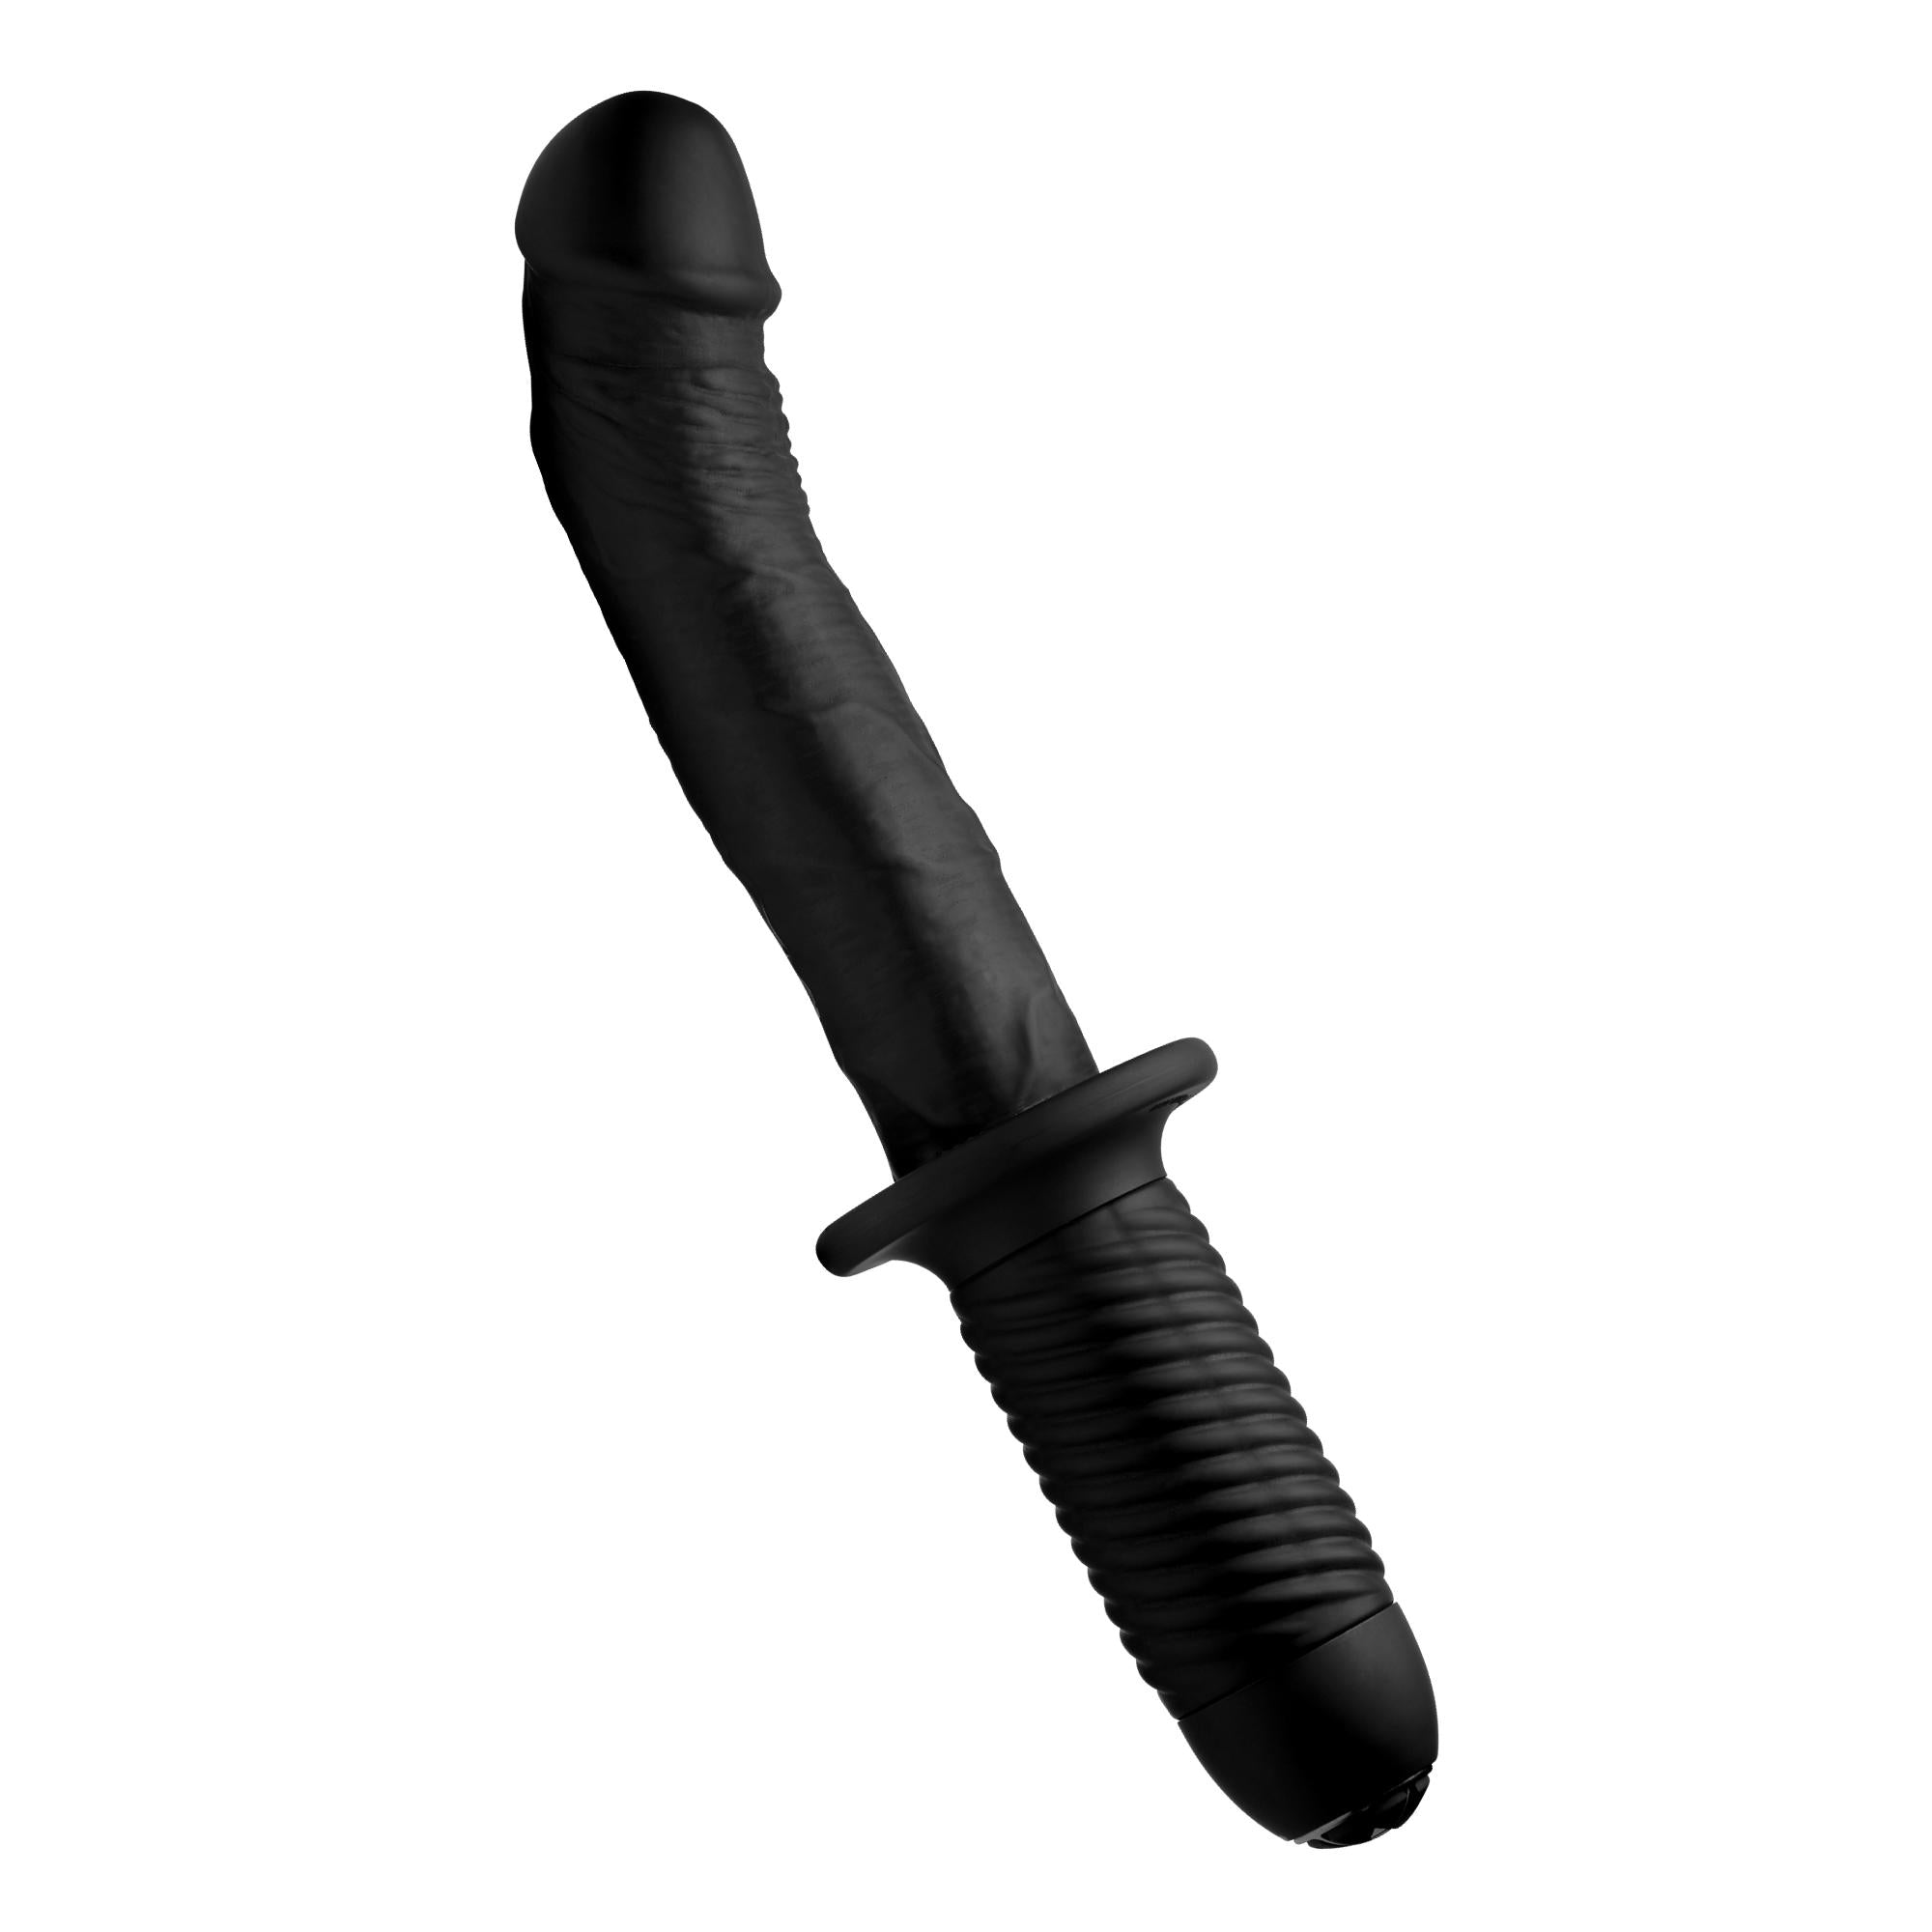 Ass Thumpers The Large Realistic 10X Silicone Vibrator with Handle